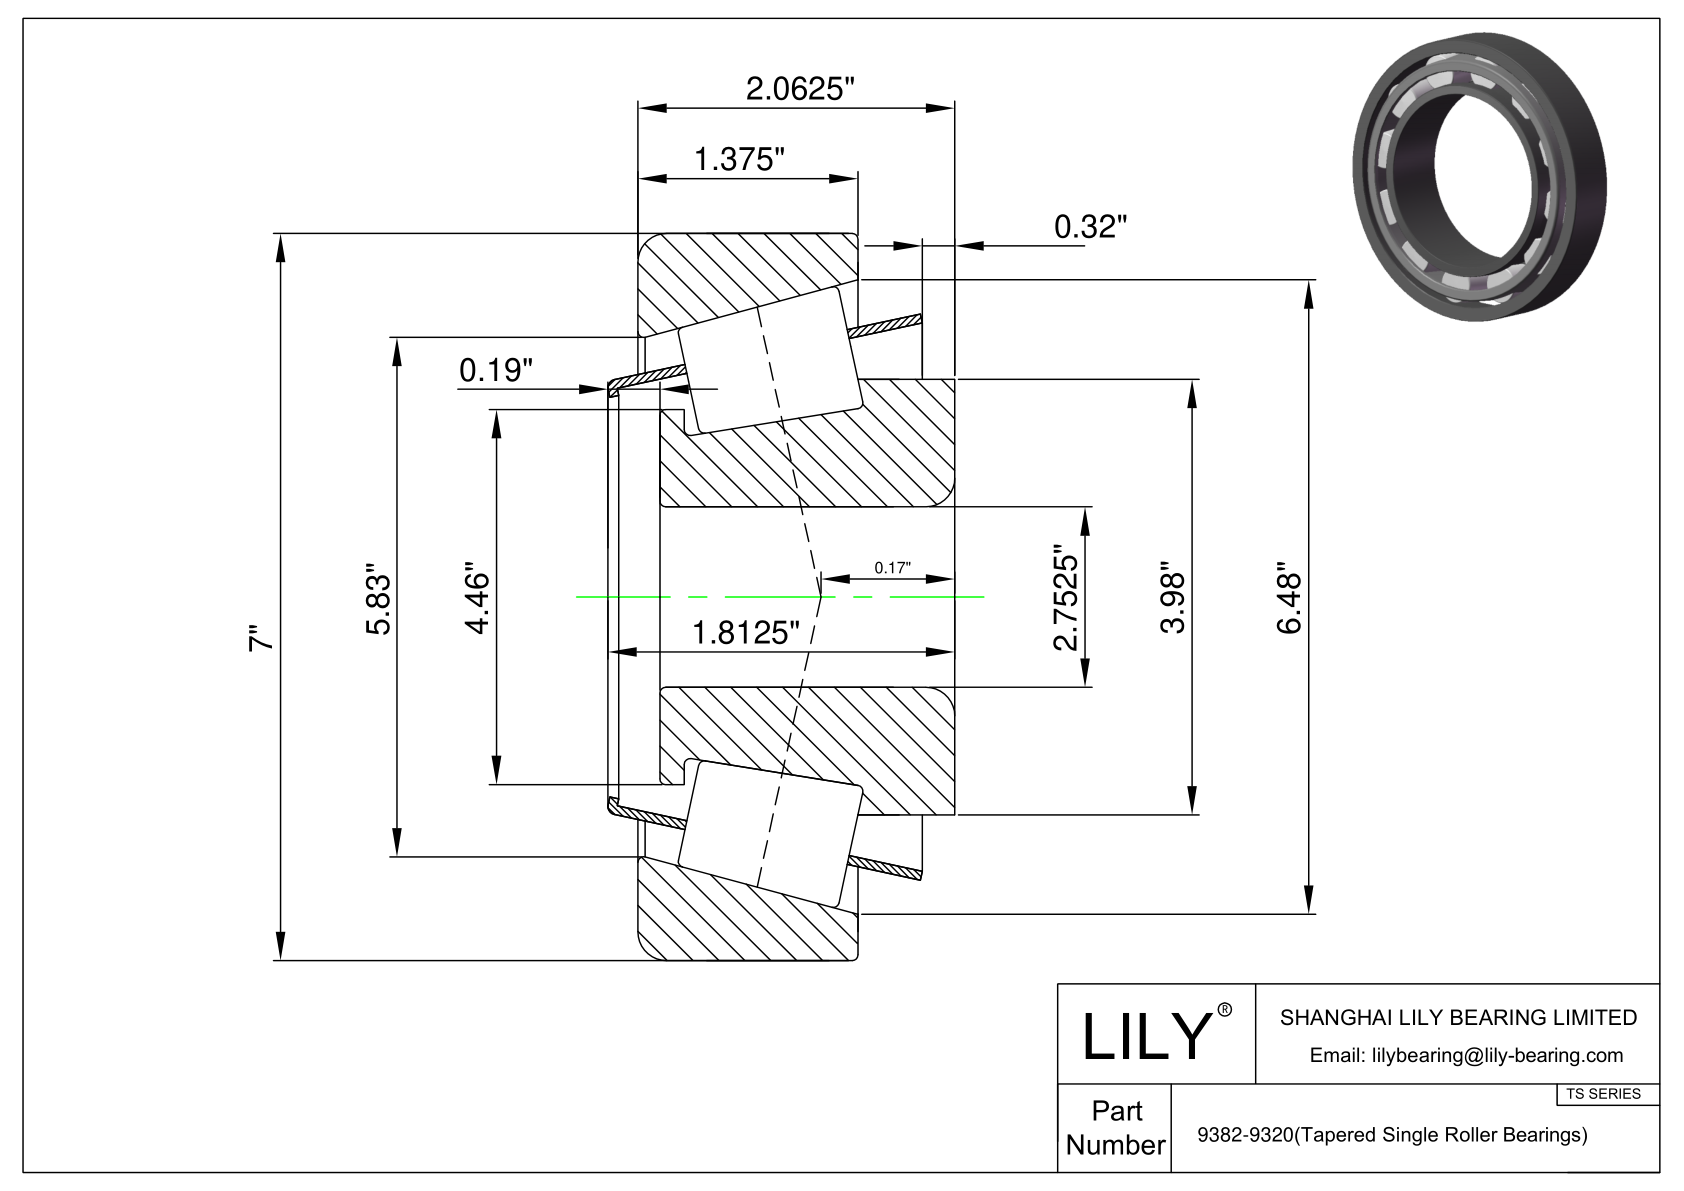 9382-9320 TS (Tapered Single Roller Bearings) (Imperial) cad drawing